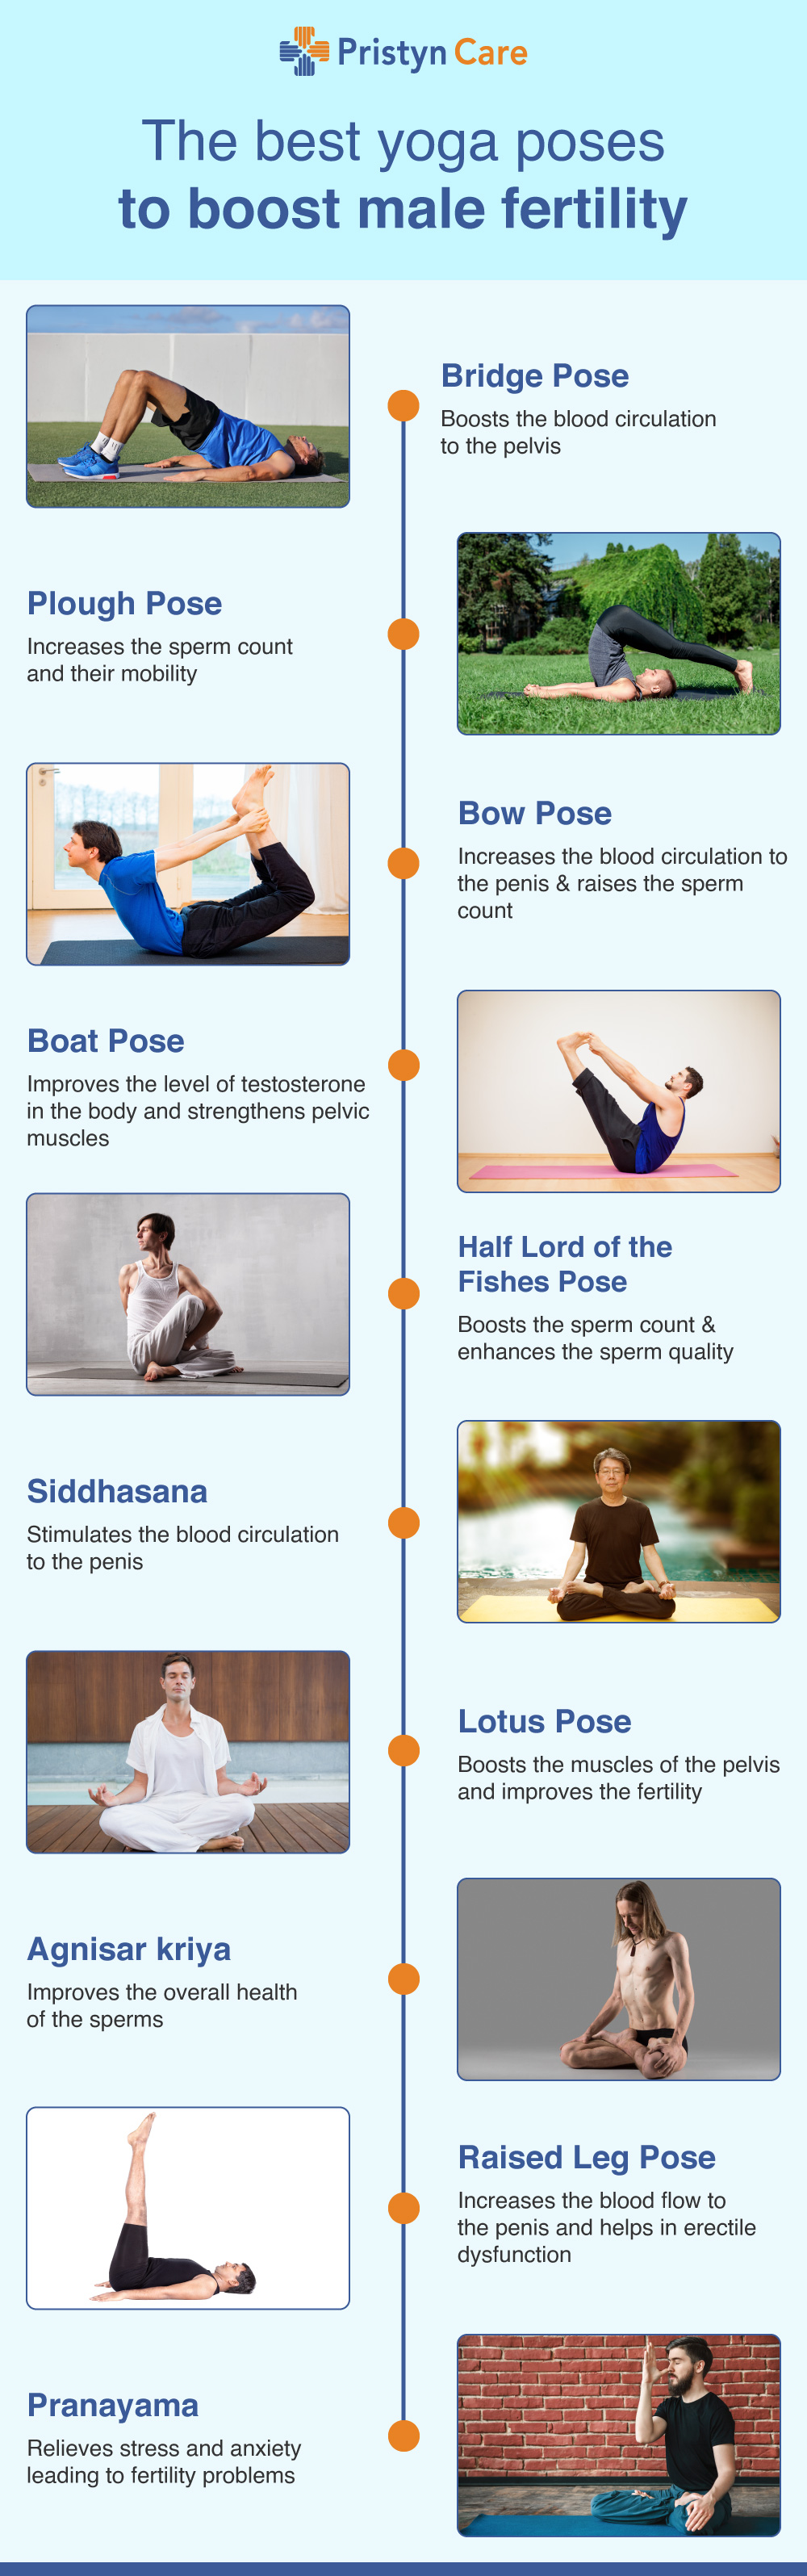 A Yogic Approach to the Prevention and Management of Lifestyle Disorders  Through Asanas, Pranayamas, Mudras and Lifestyle Modifications | PDF | Asana  | Obesity